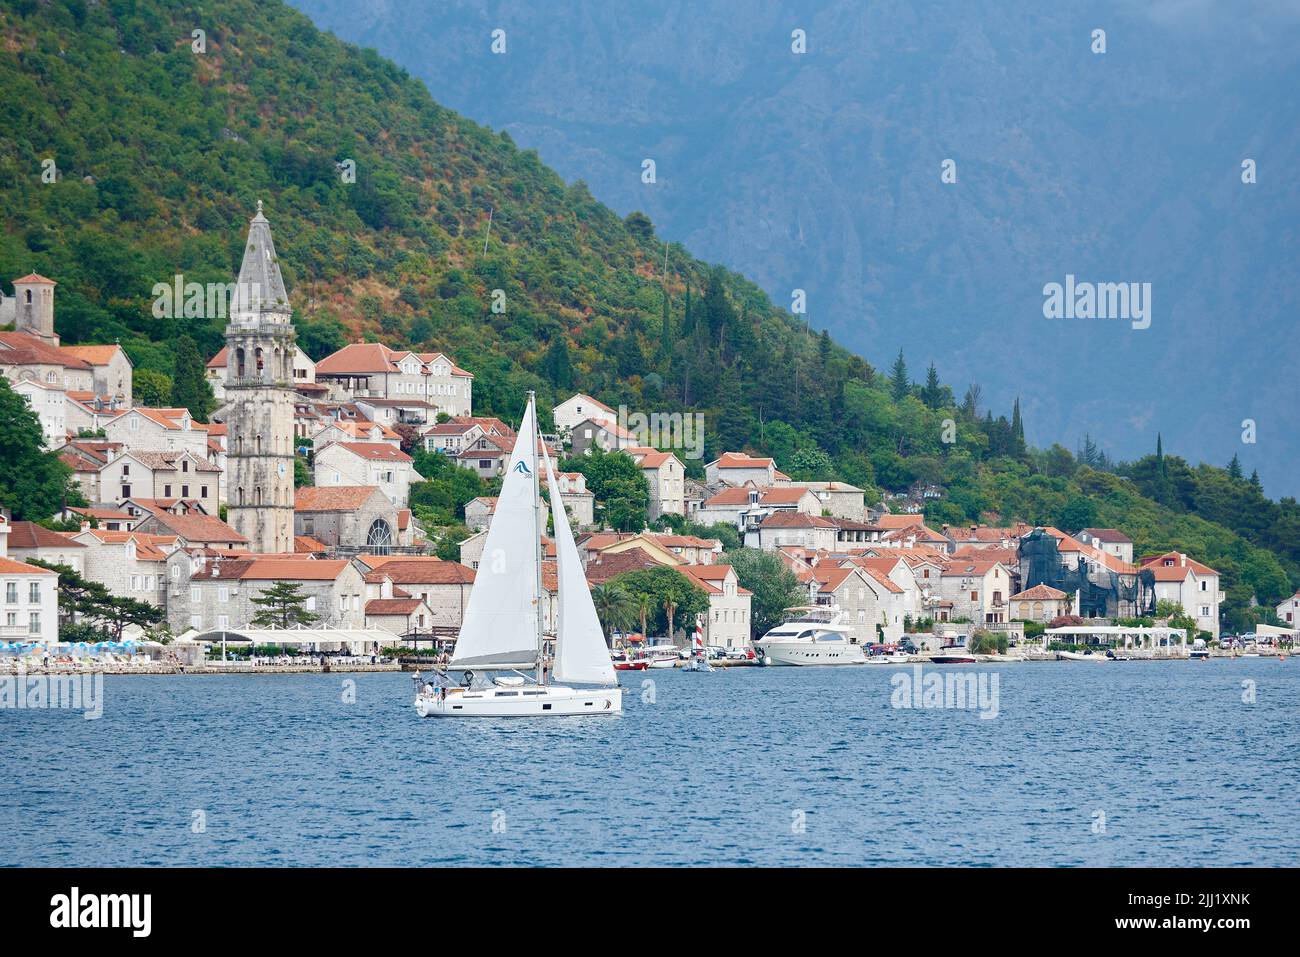 Sails yacht in sea against the backdrop of old seaside town. Stock Photo